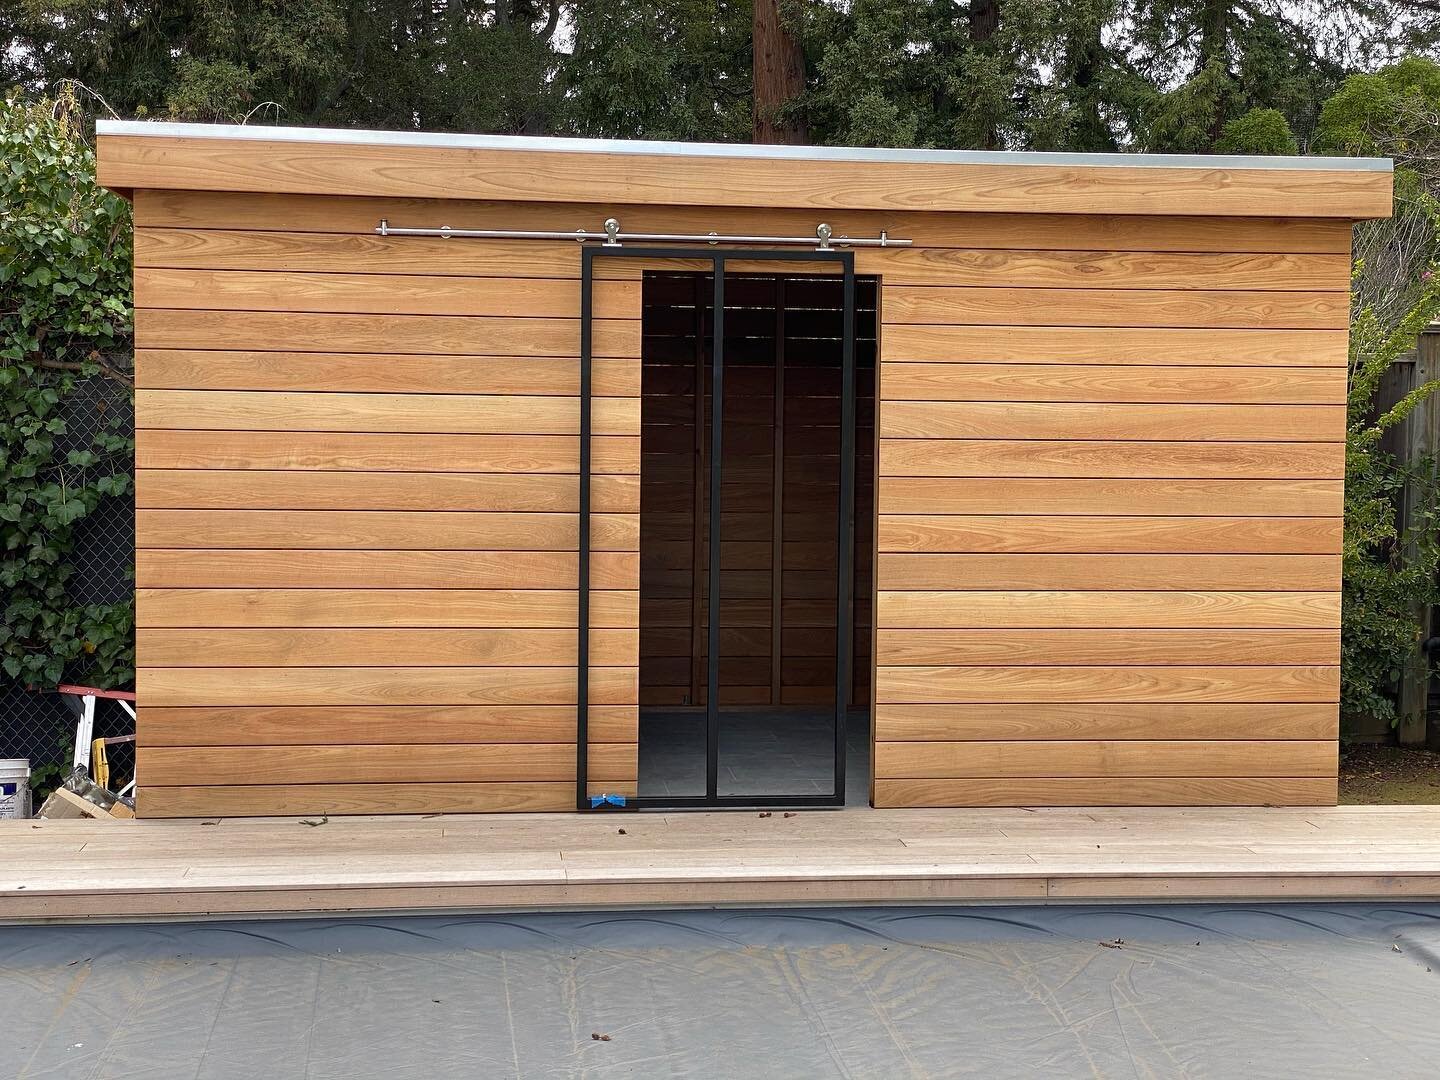 Teak Pool Cabana coming along nicely! Featuring stone floor, shower and waterproof storage.